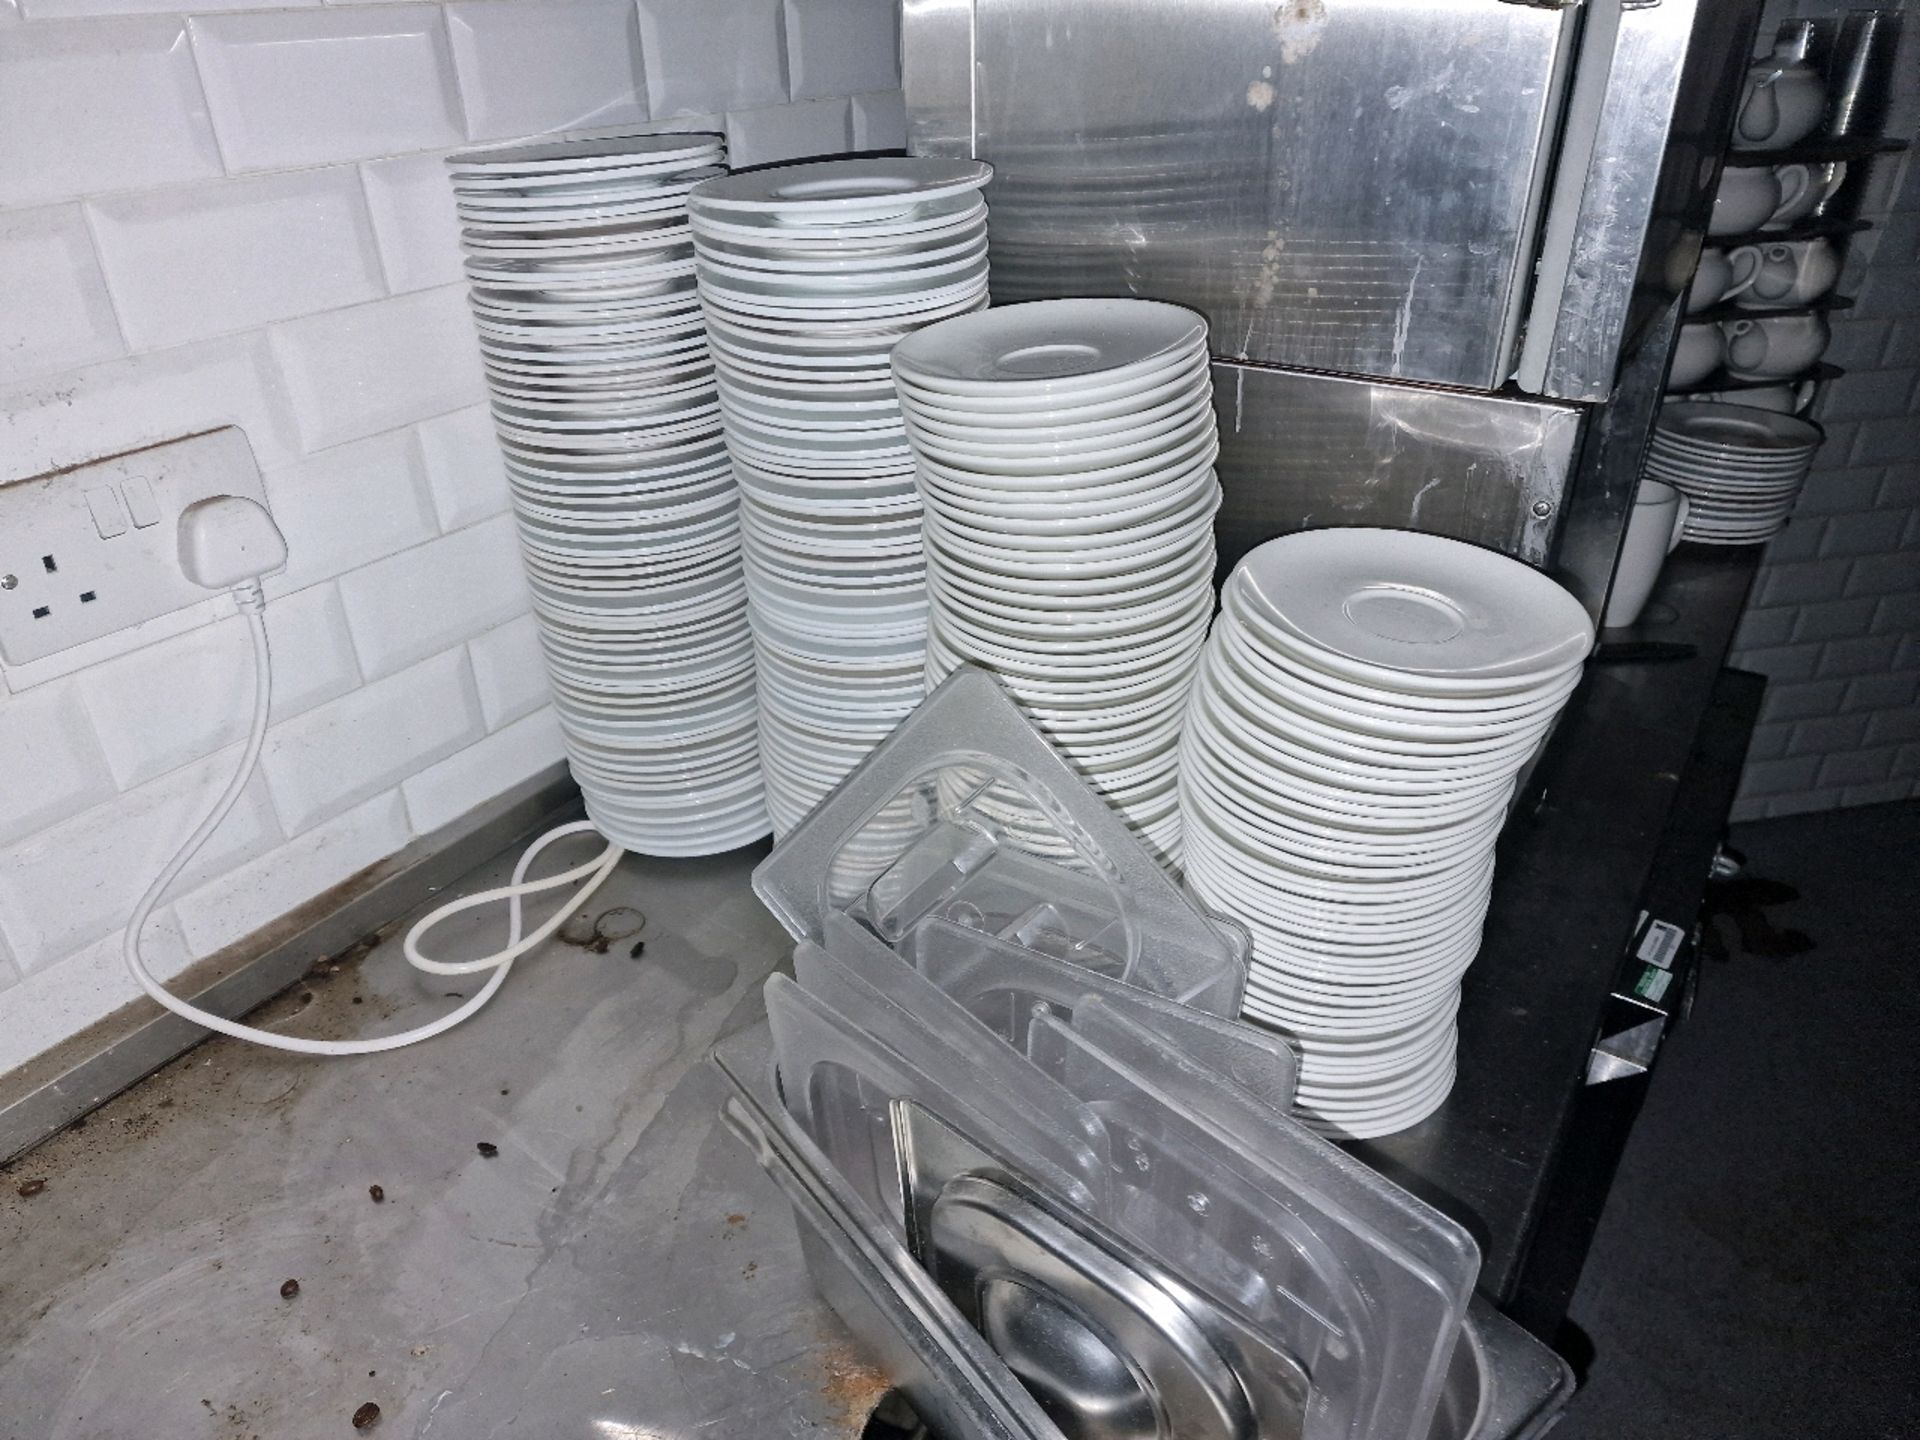 Quantity of Cafeteria Teapots, Plates and Cups - Image 2 of 3